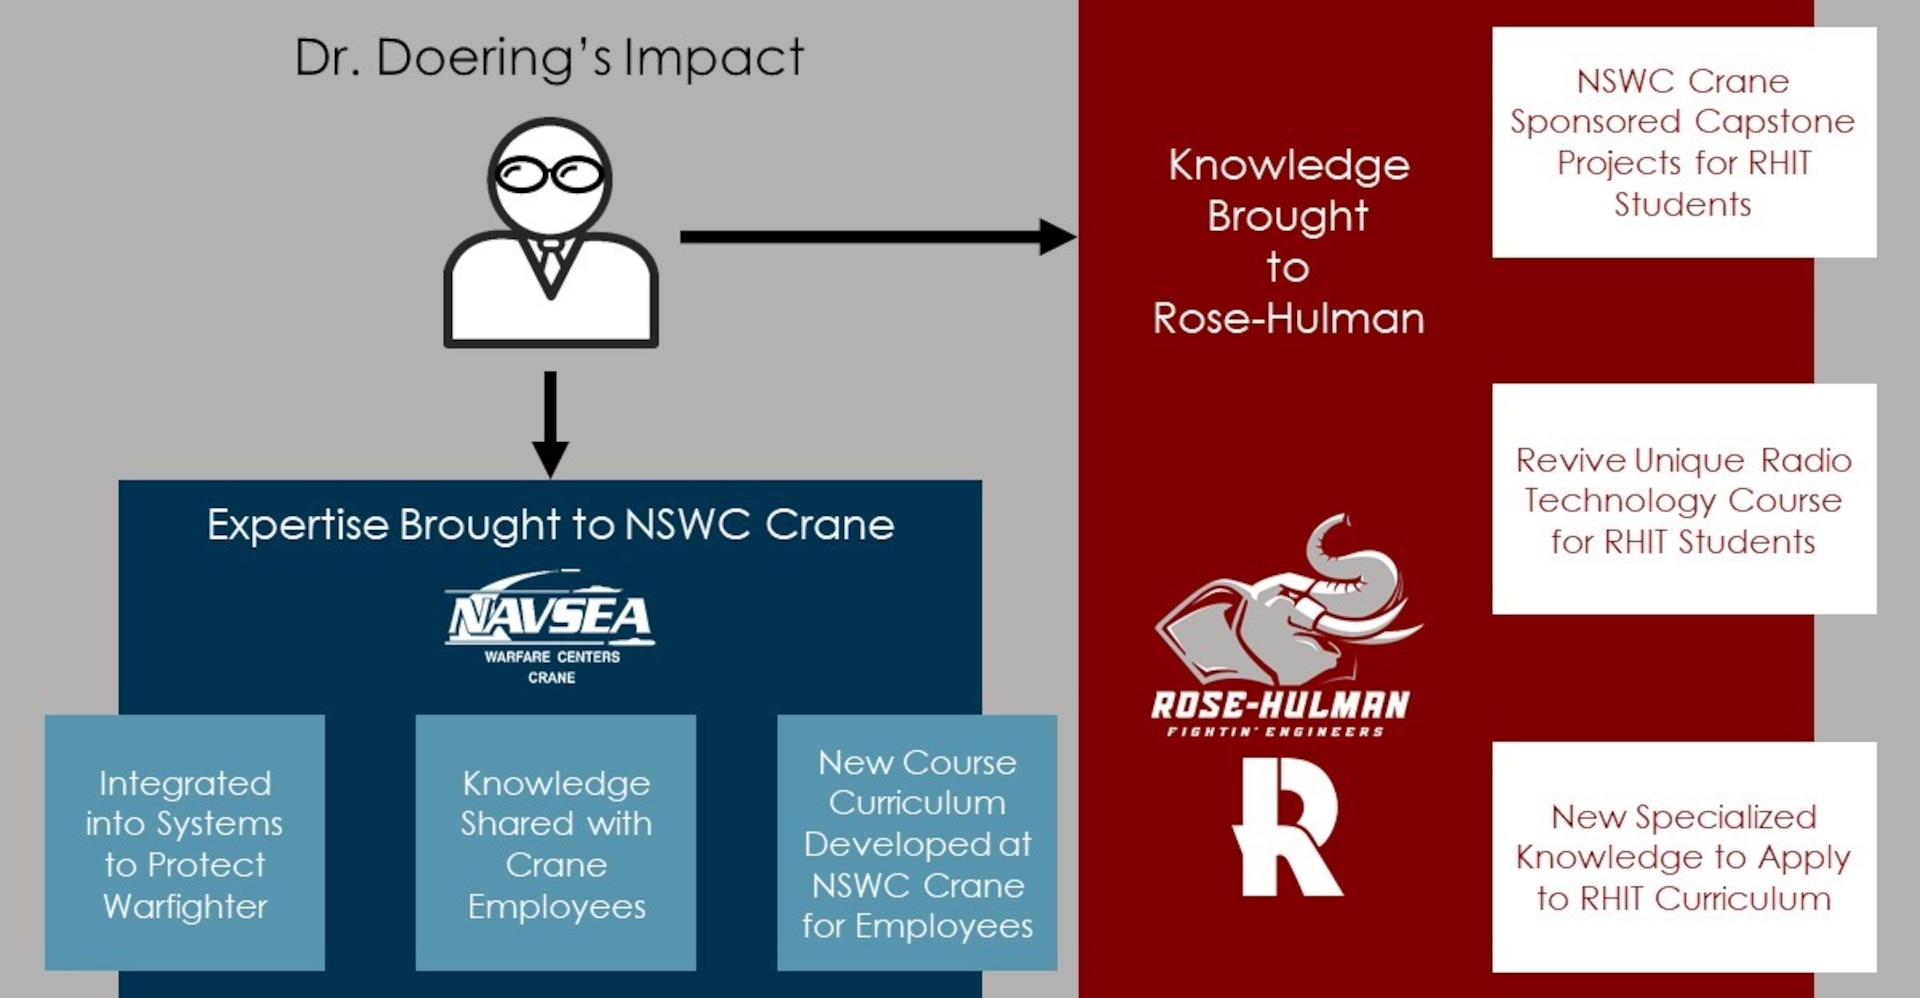 Graphic showing Dr. Doering's impact to NSWC Crane and RHIT